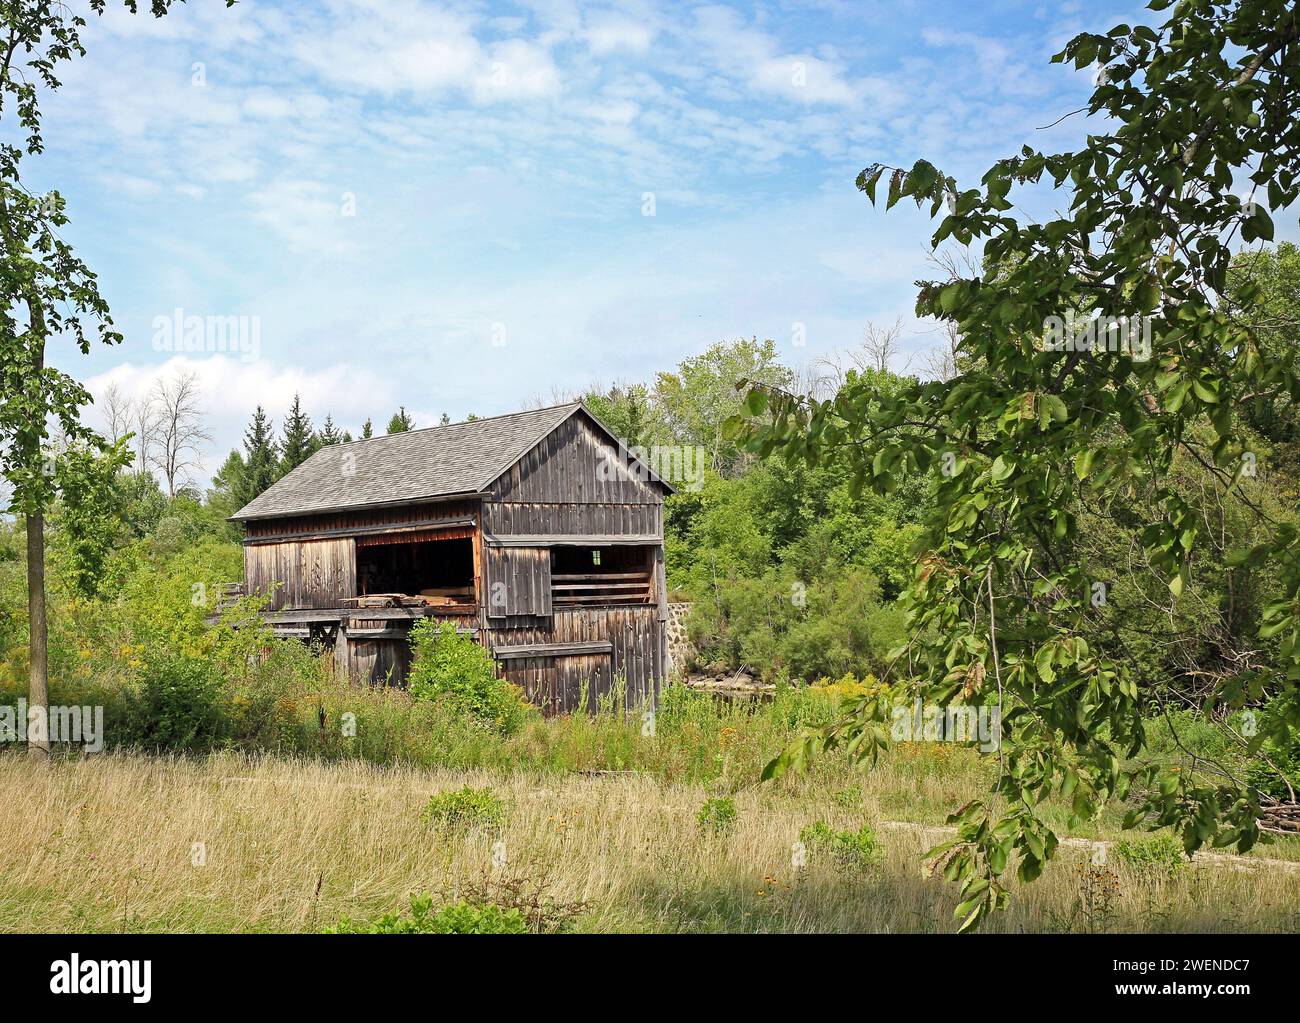 Old Sawmill Wooden Building in country, partly clouded sky with trees. Stock Photo